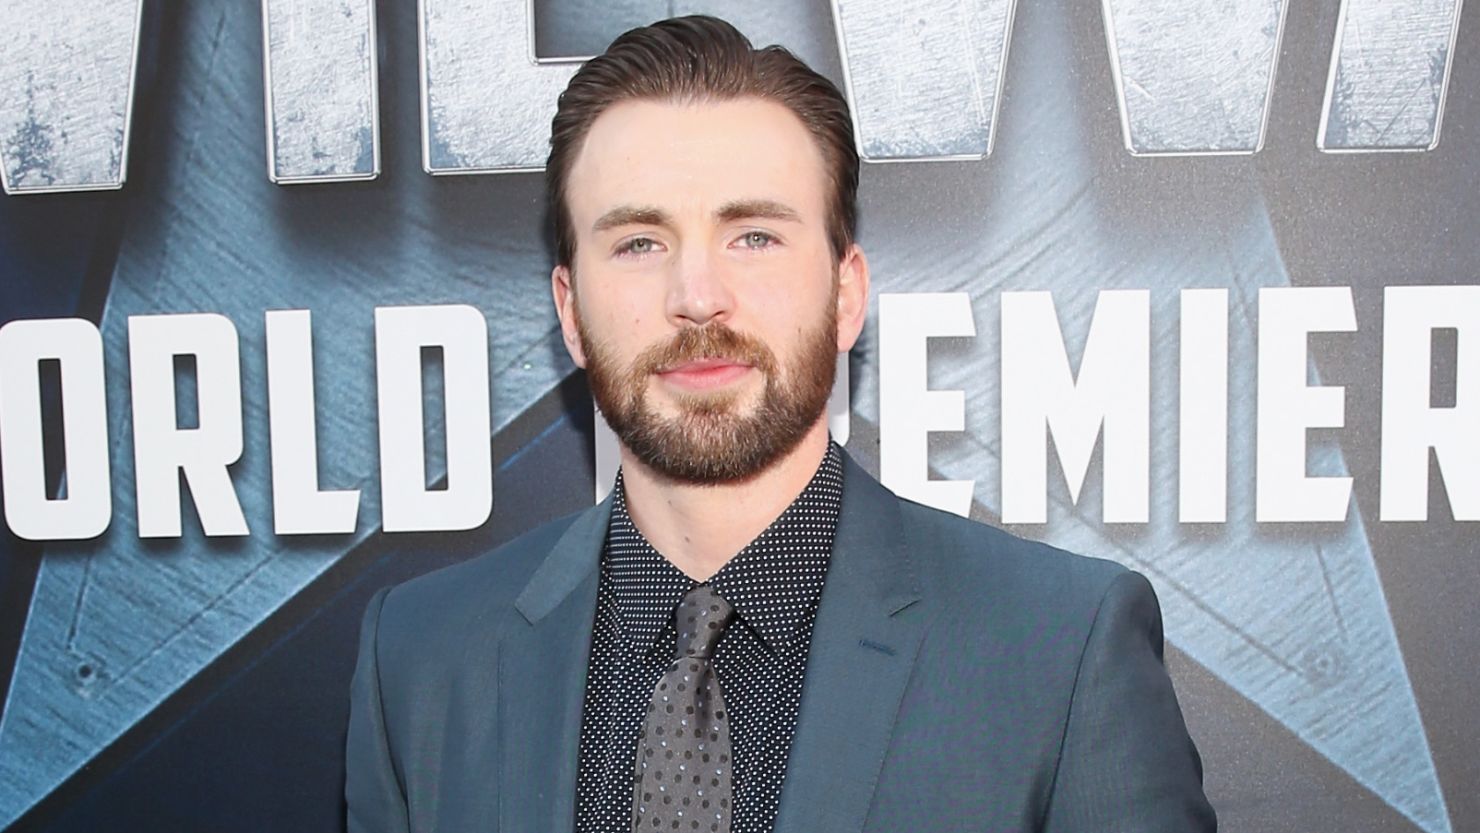 Chris Evans will voice Buzz Lightyear in a new Disney origin story for the character .  (Photo by Jesse Grant/Getty Images for Disney)